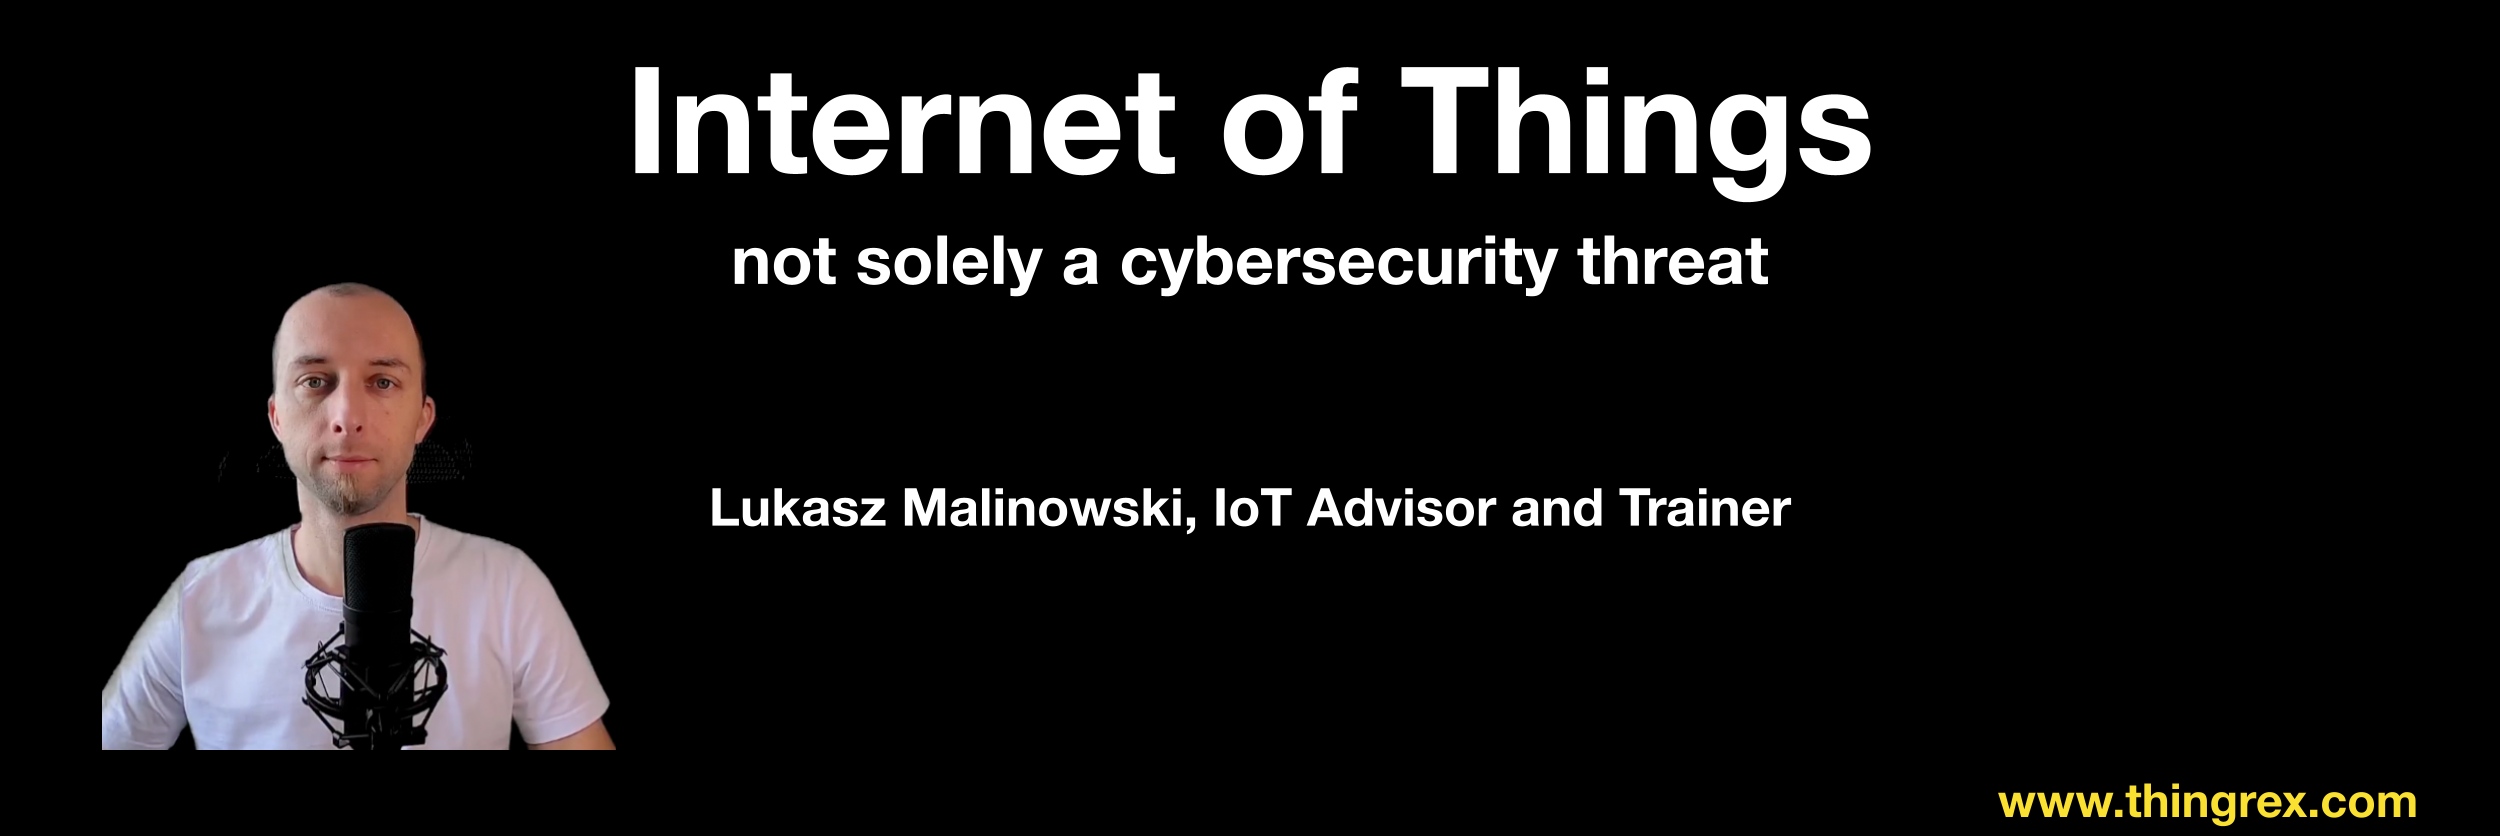 /posts/iot_security_threat/iot_security_threat.png